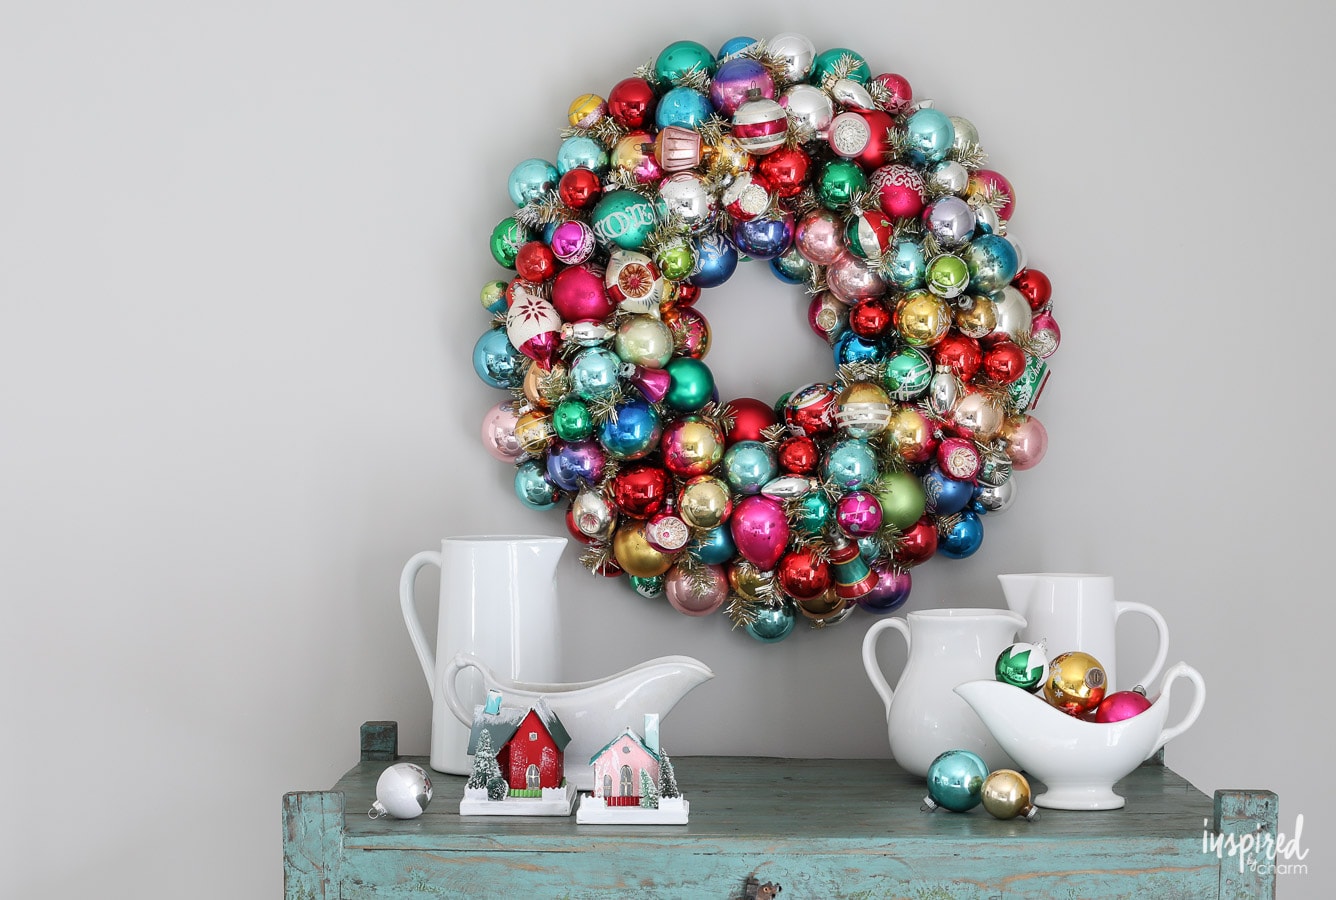 Learn how to make this DIY Vintage Christmas Ornament Wreath #christmas #ornament #wreath #shinybrite #vintage #christmaswreath #DIY #holiday